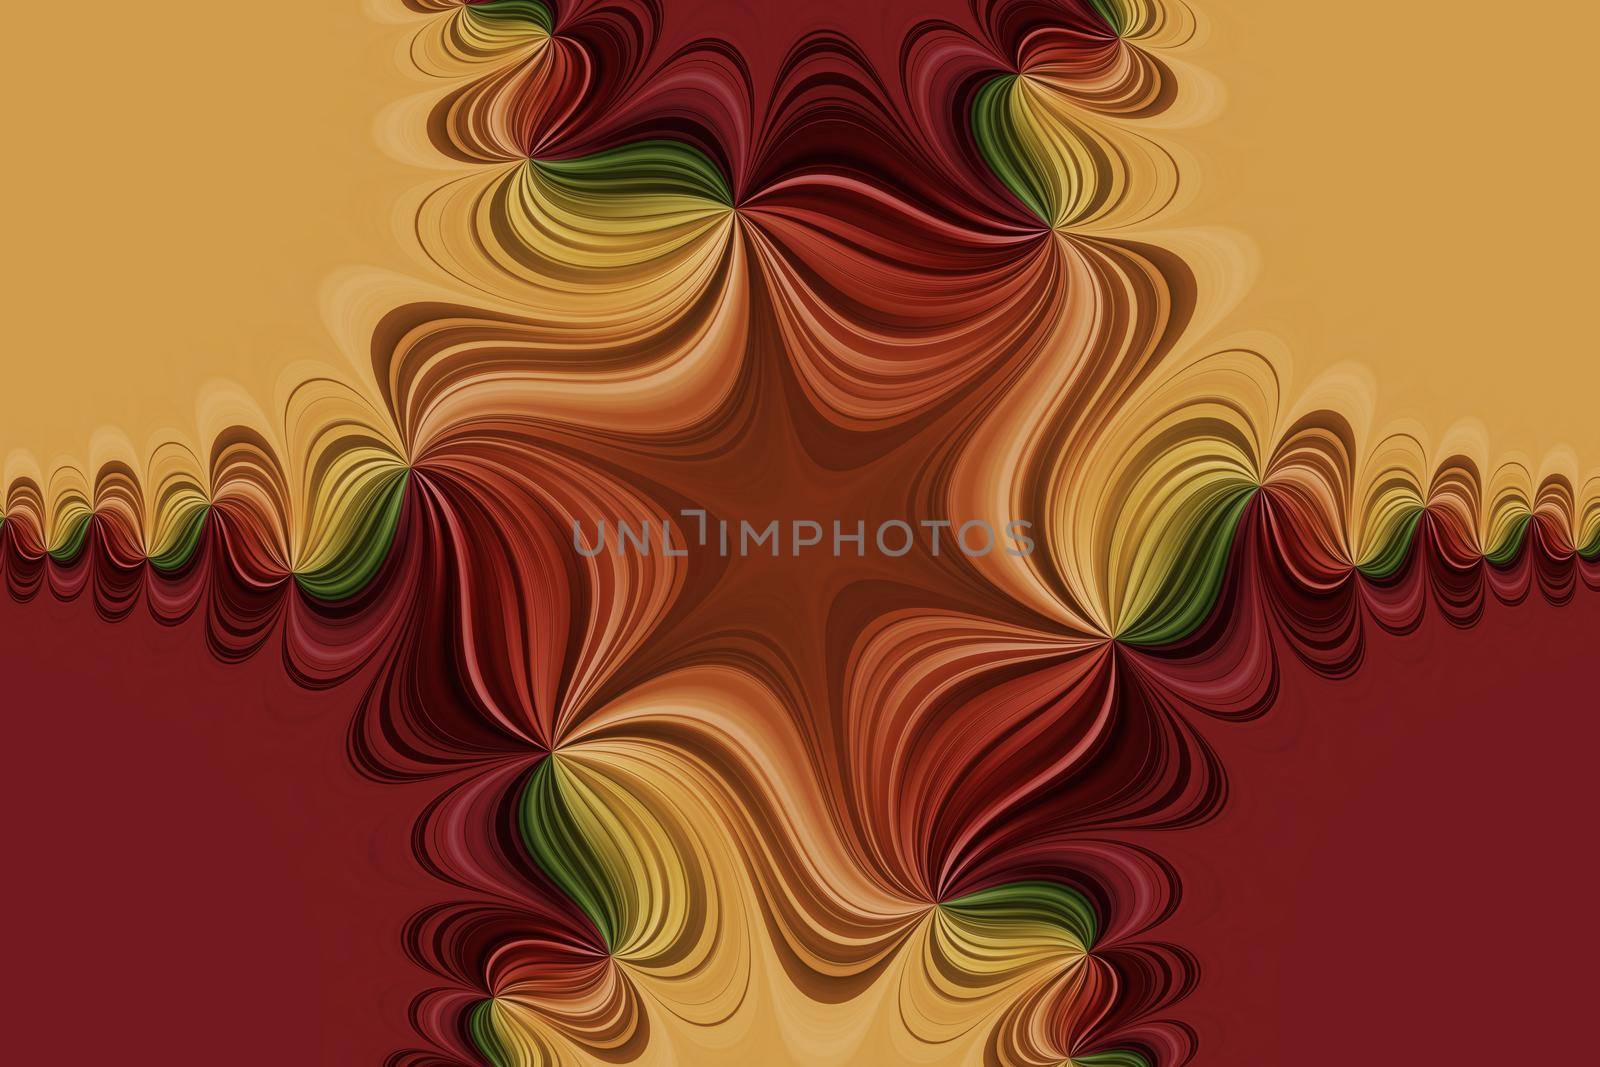 Red, orange, yellow, green curved lines with kaleidoscopic effect, abstract decorative background, seamless pattern